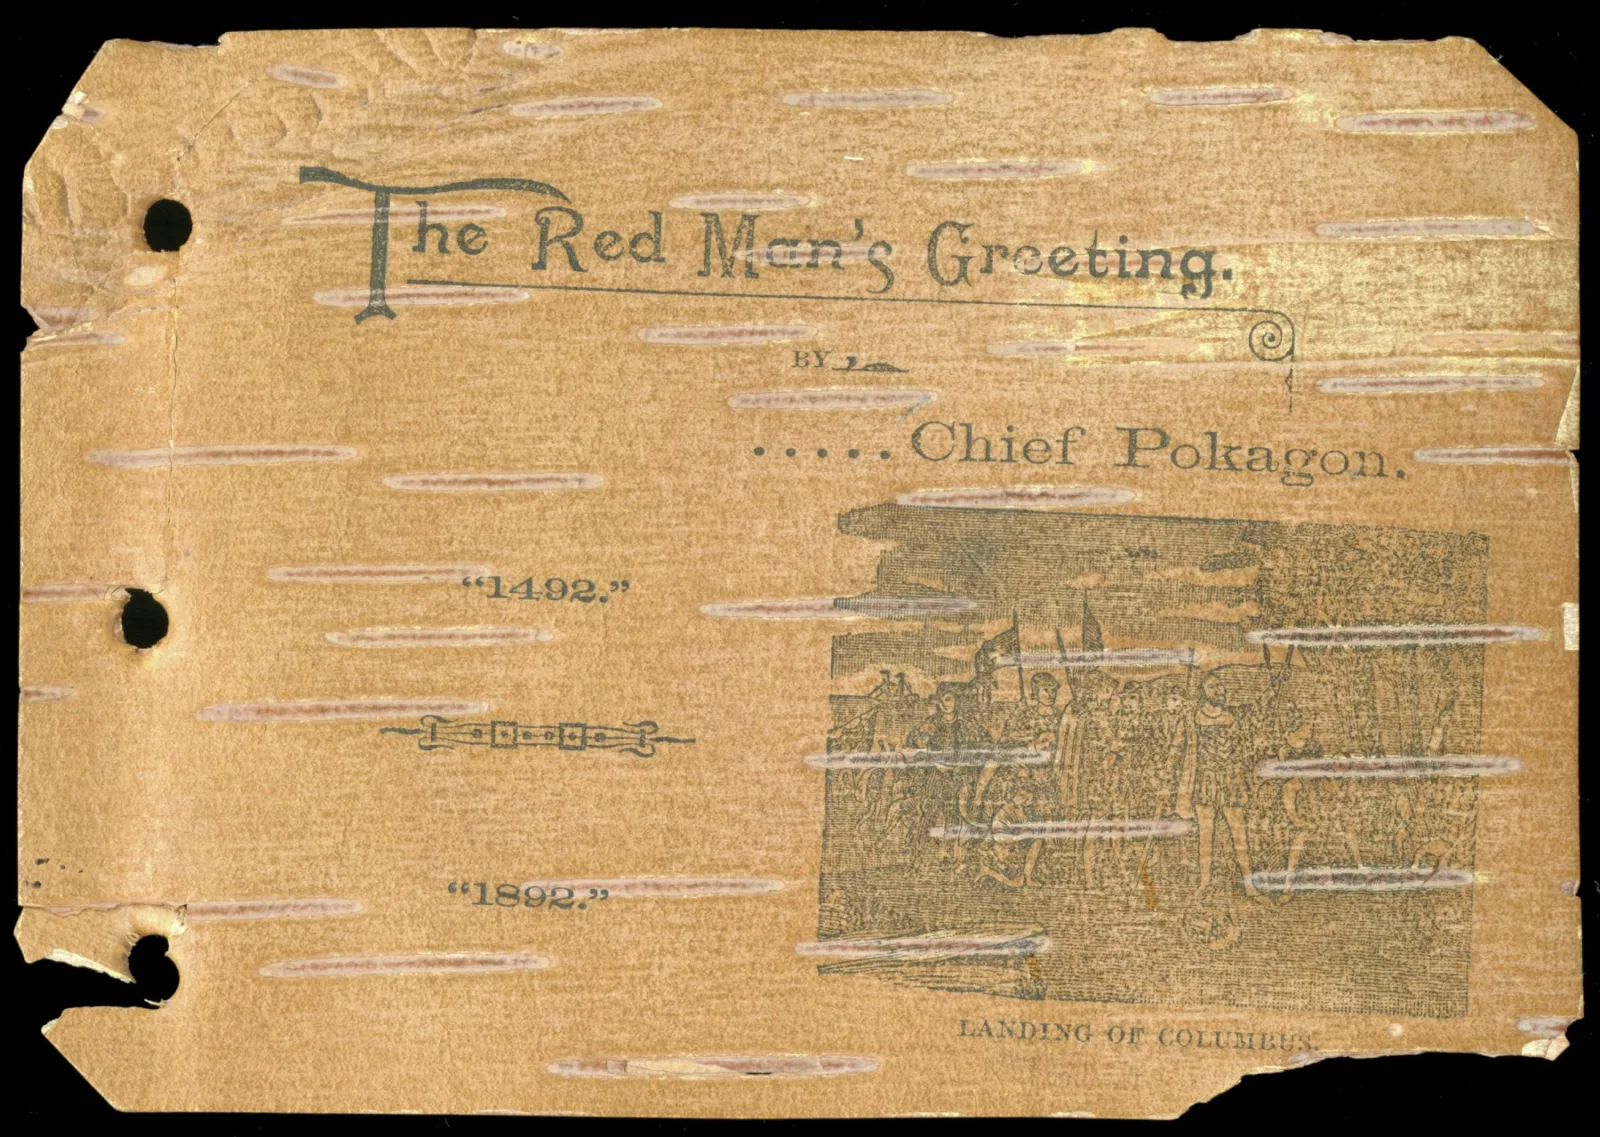 The cover of the "Red Man's Greeting" by Simon Pokagon. The words "The Red Man's Greeting by Simon Pokagon" are printed on birchbark, along with an image depicting the landing of Columbus.